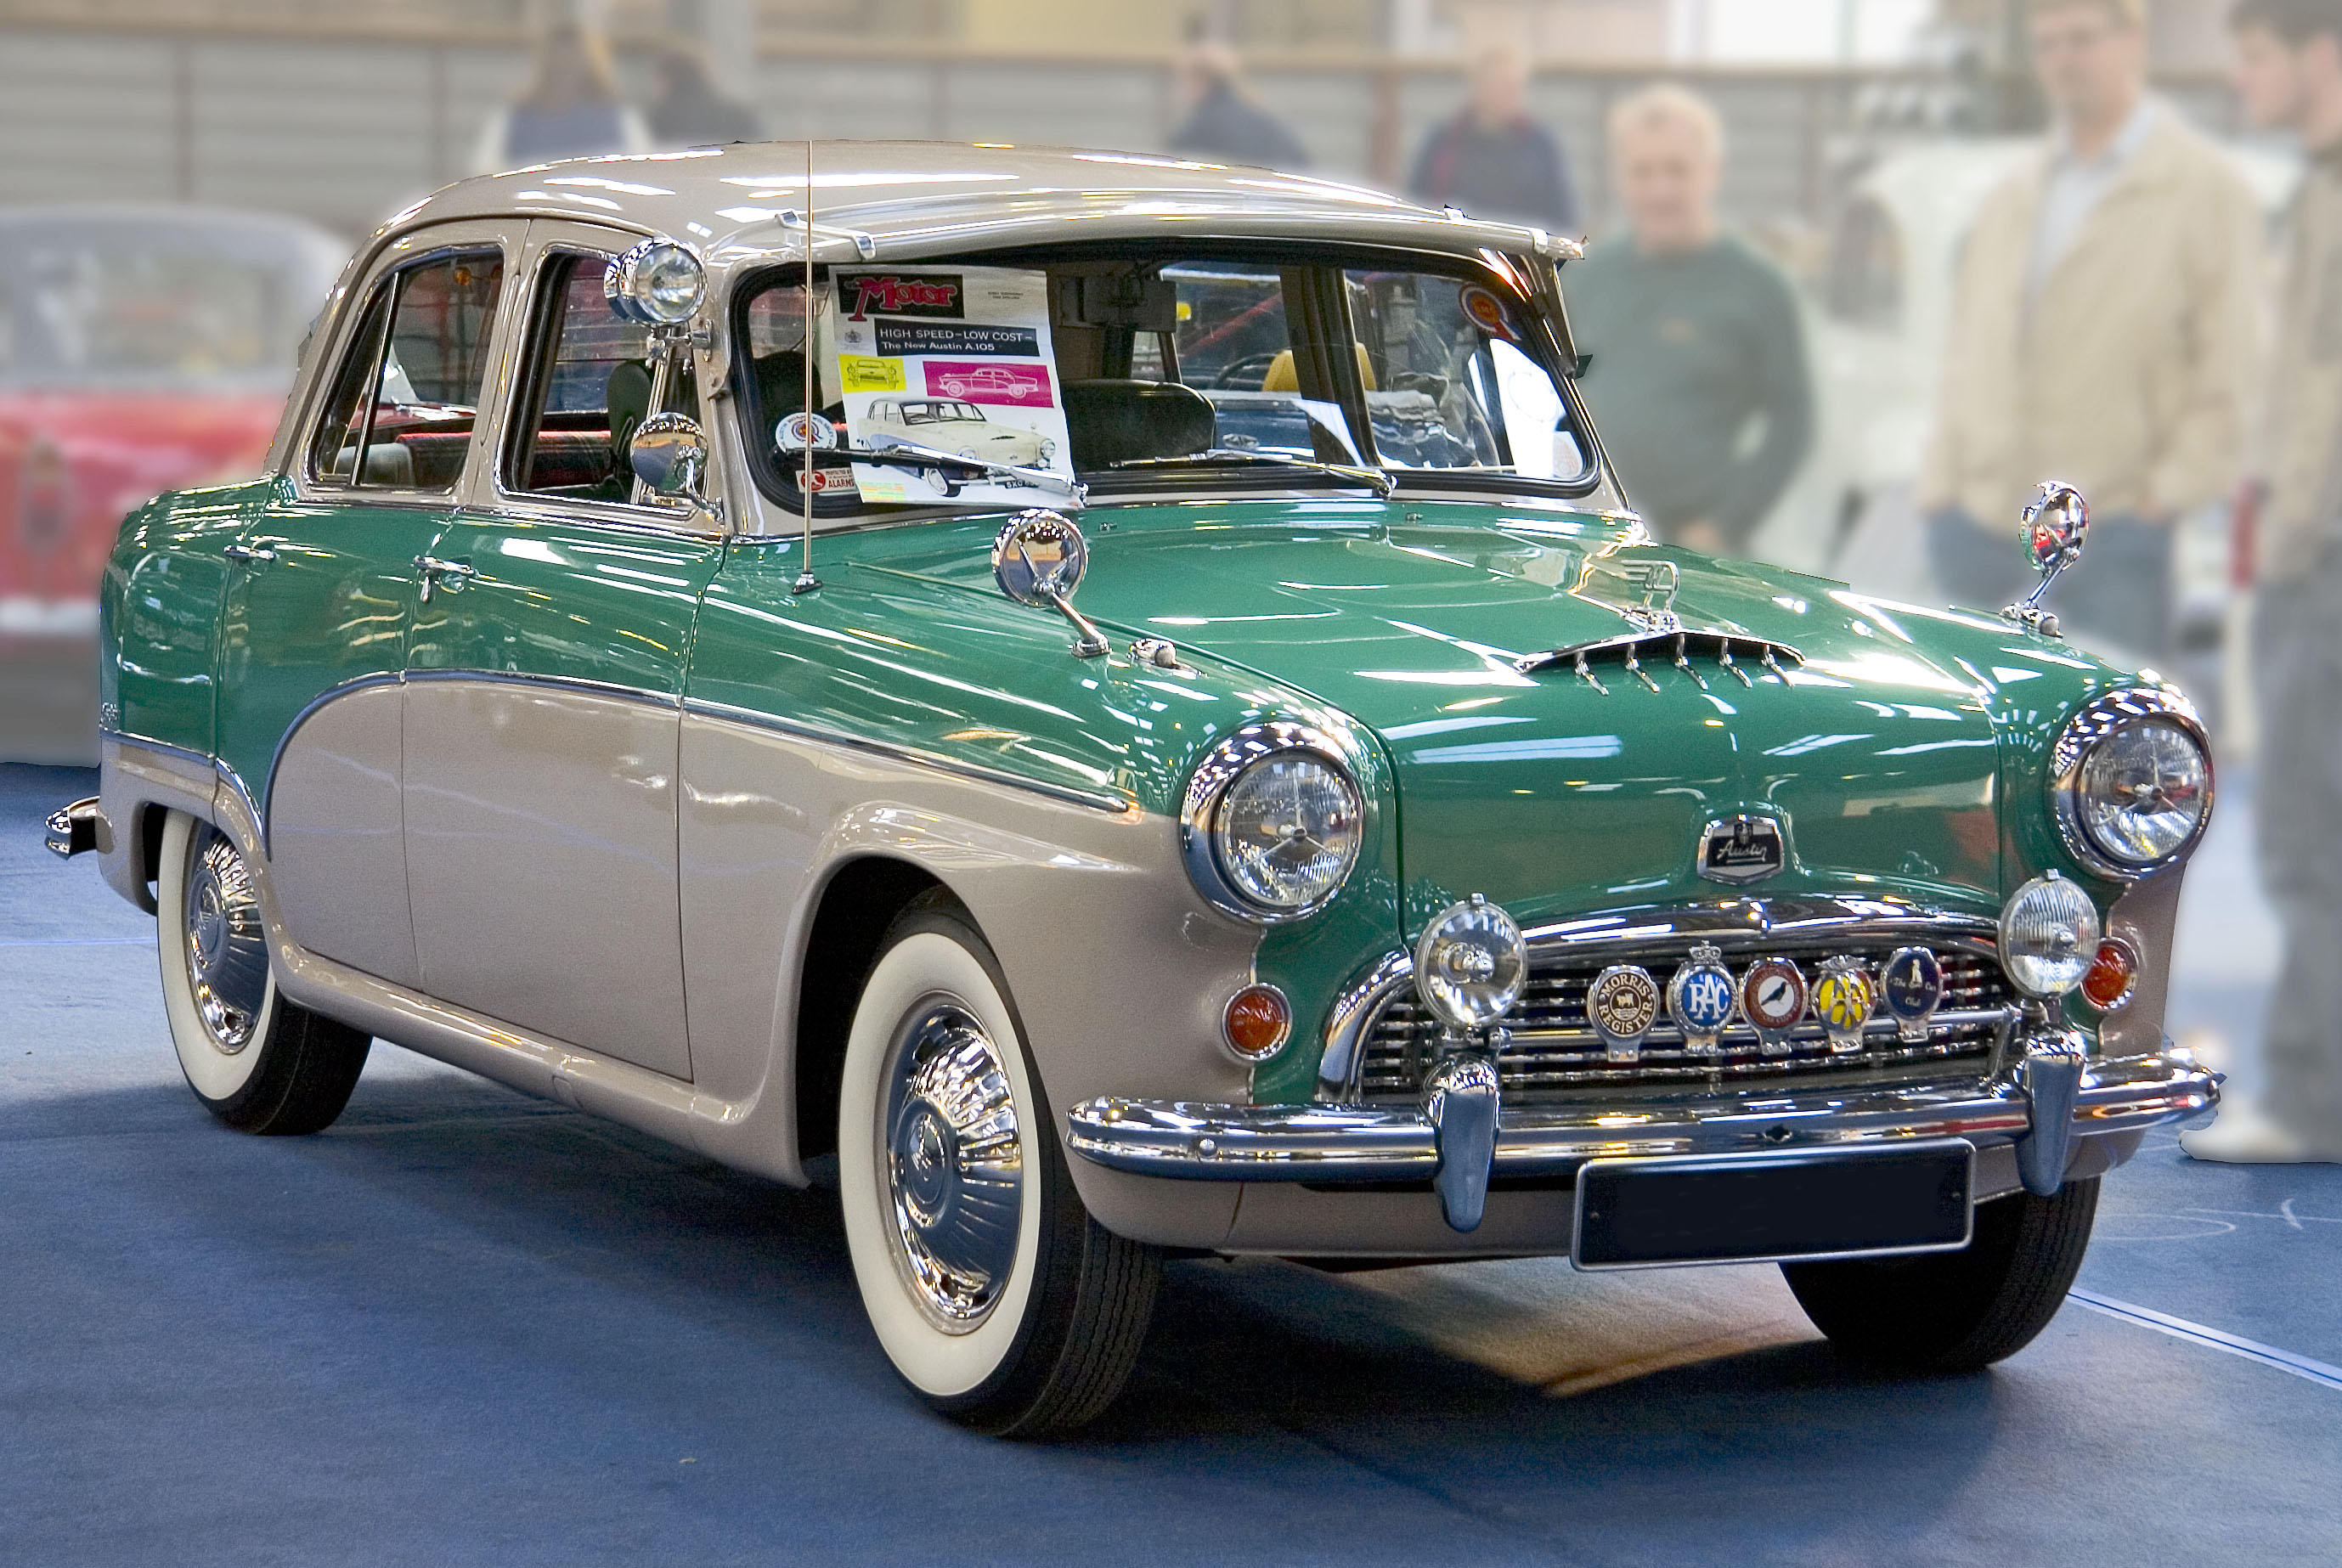 File:Austin A105 Westminster 1956 front.jpg - Wikimedia Commons